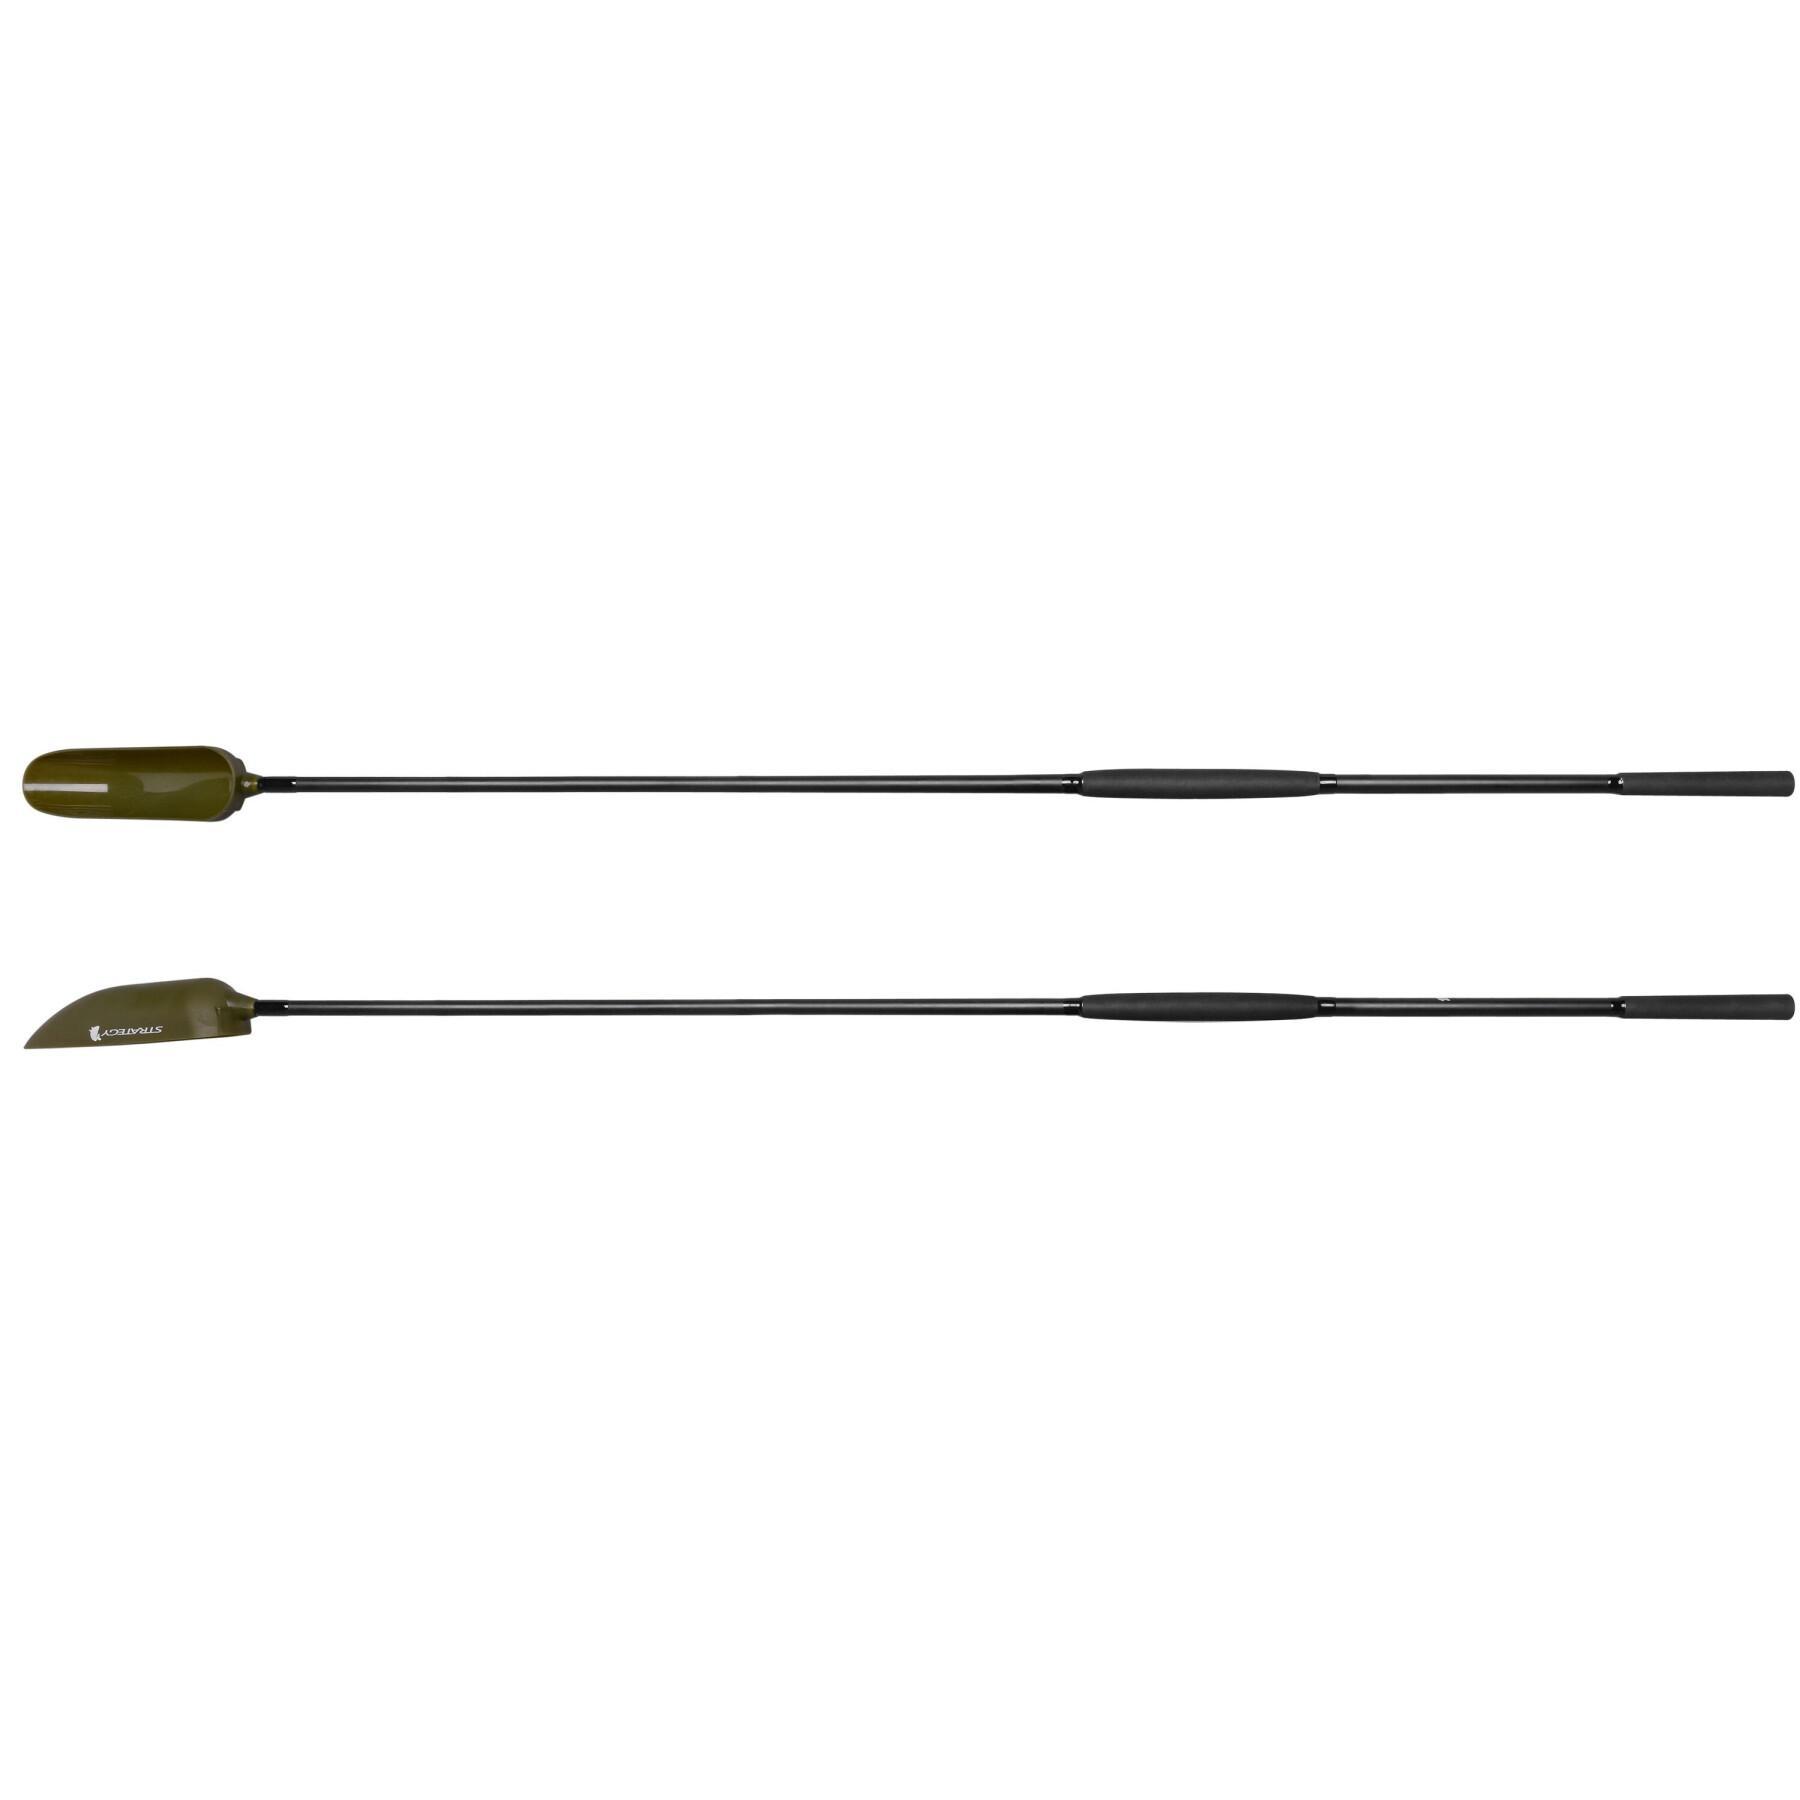 Bait spoon with long handle Spro